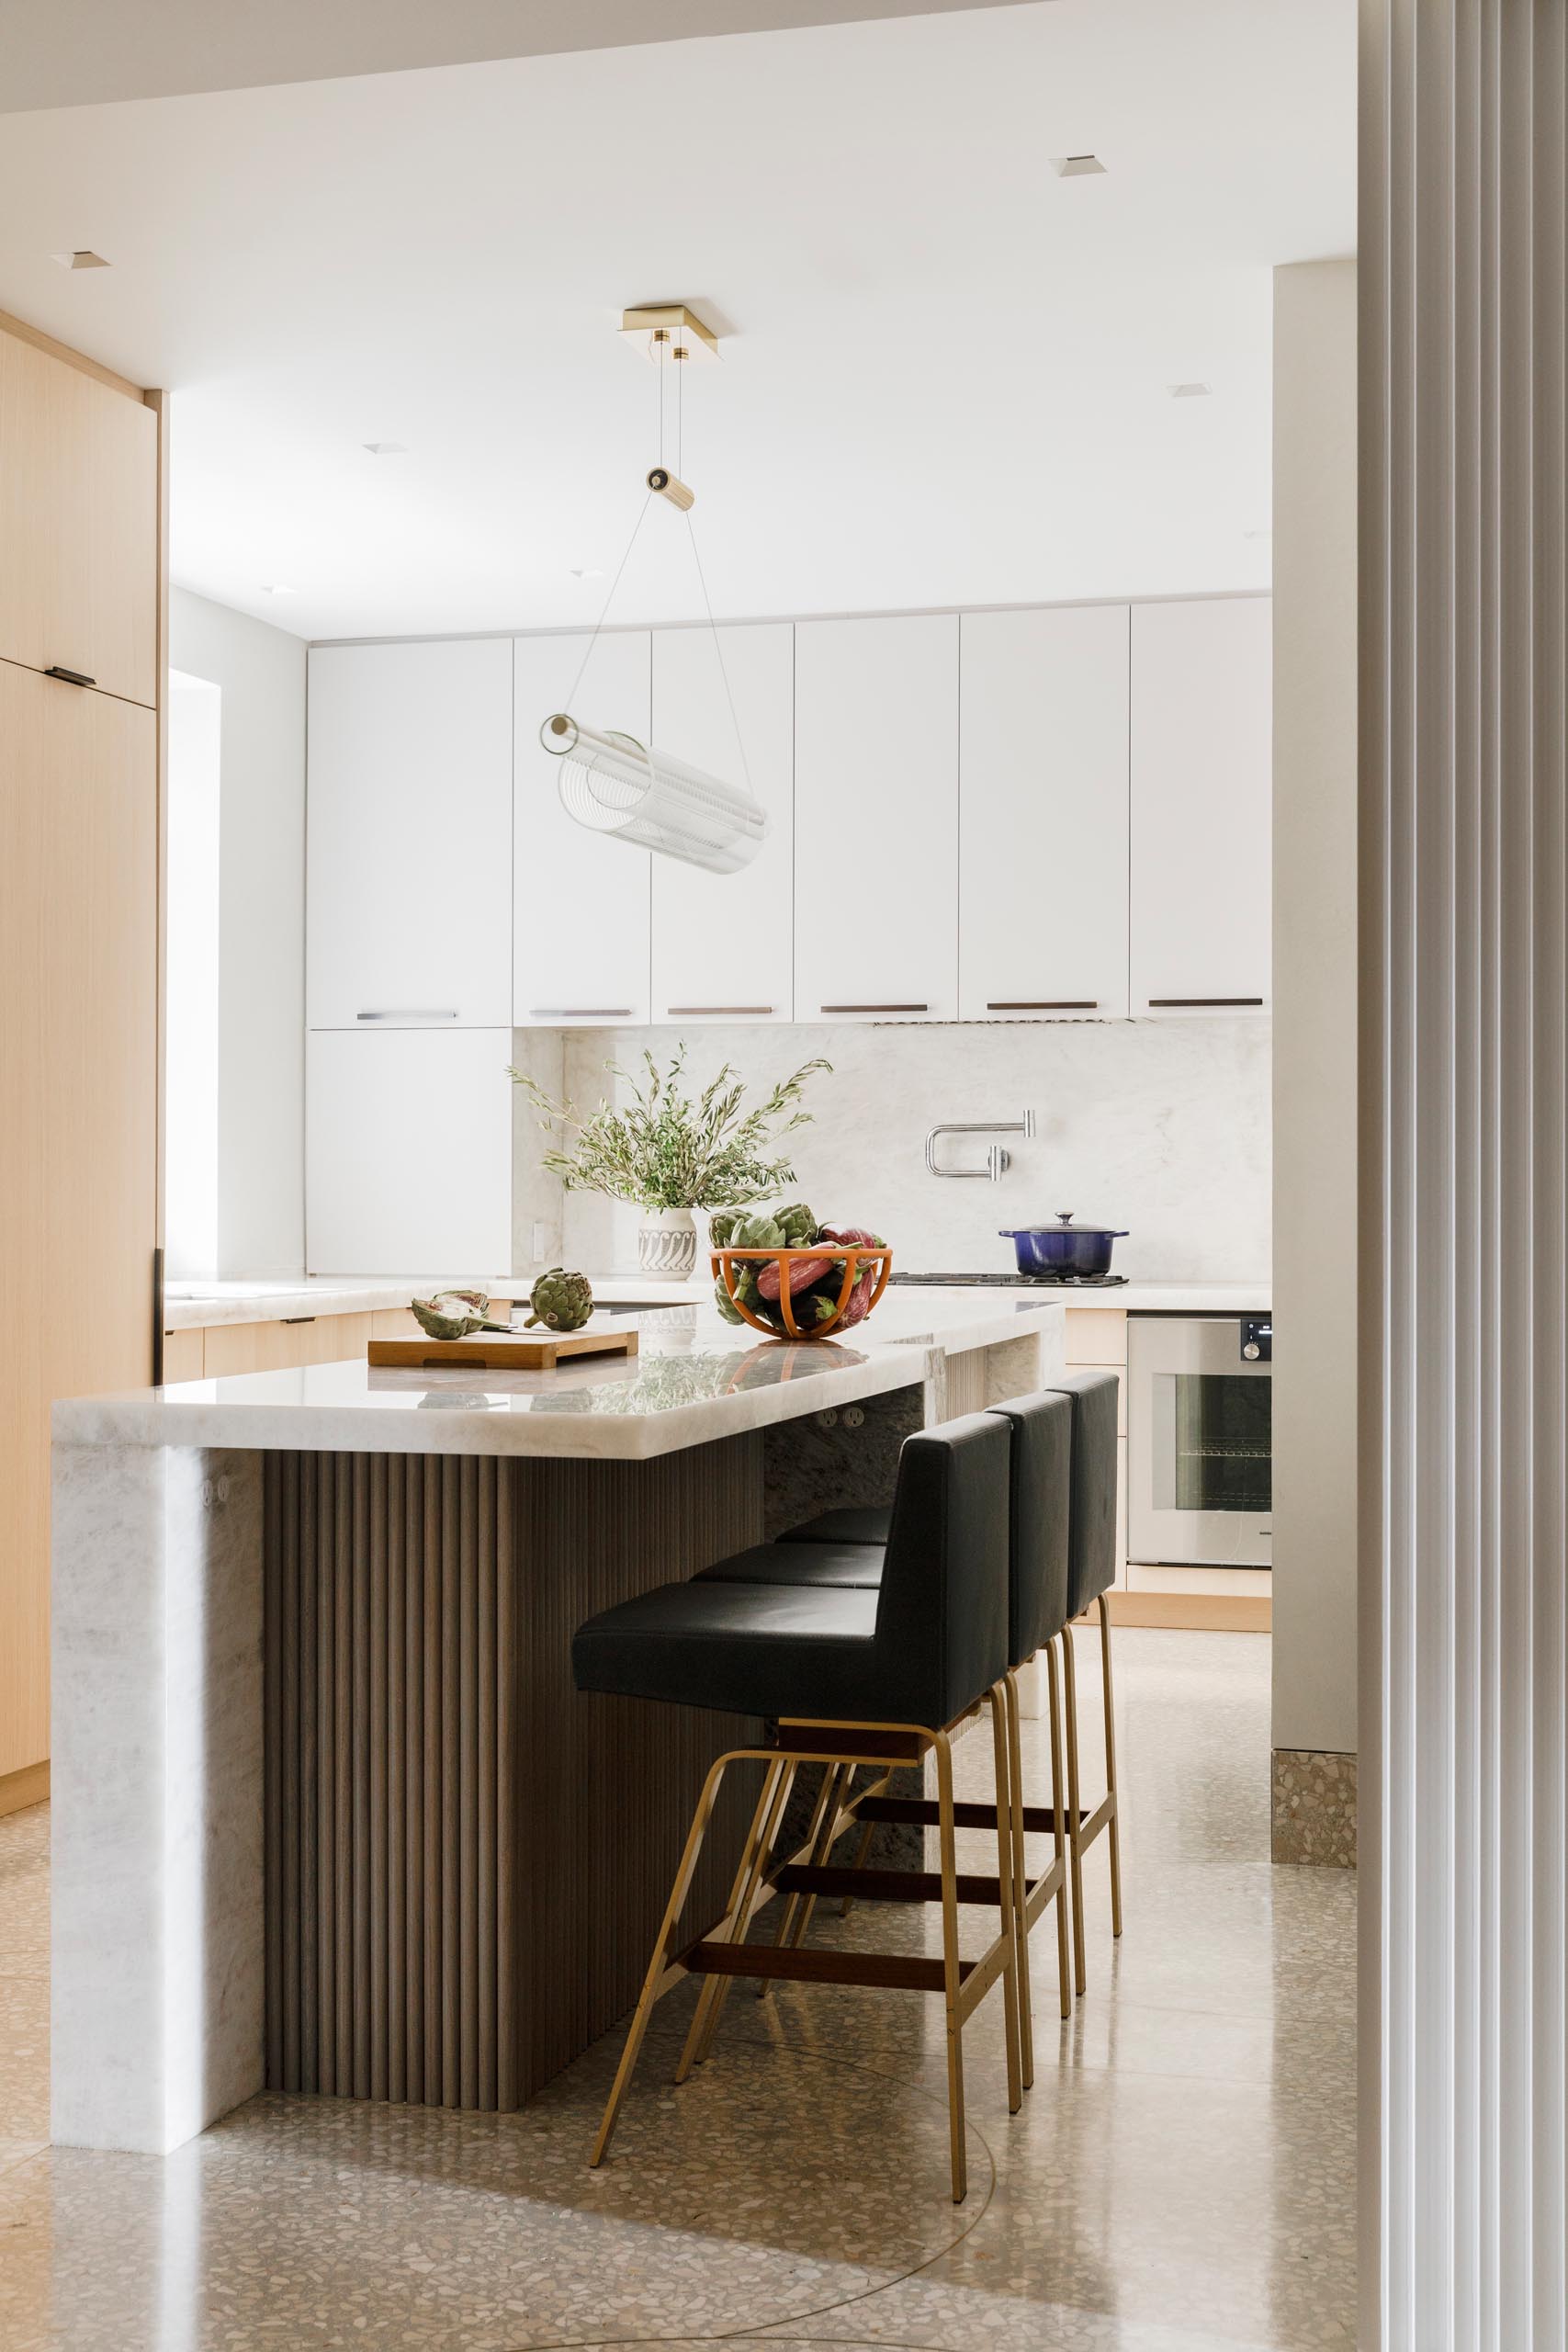 This kitchen Island is Henrybuilt with hefty stone legs and ribbed walnut cladding designed by MKCA, while the countertops are a mix of Cristallo and Ice Grey marble.